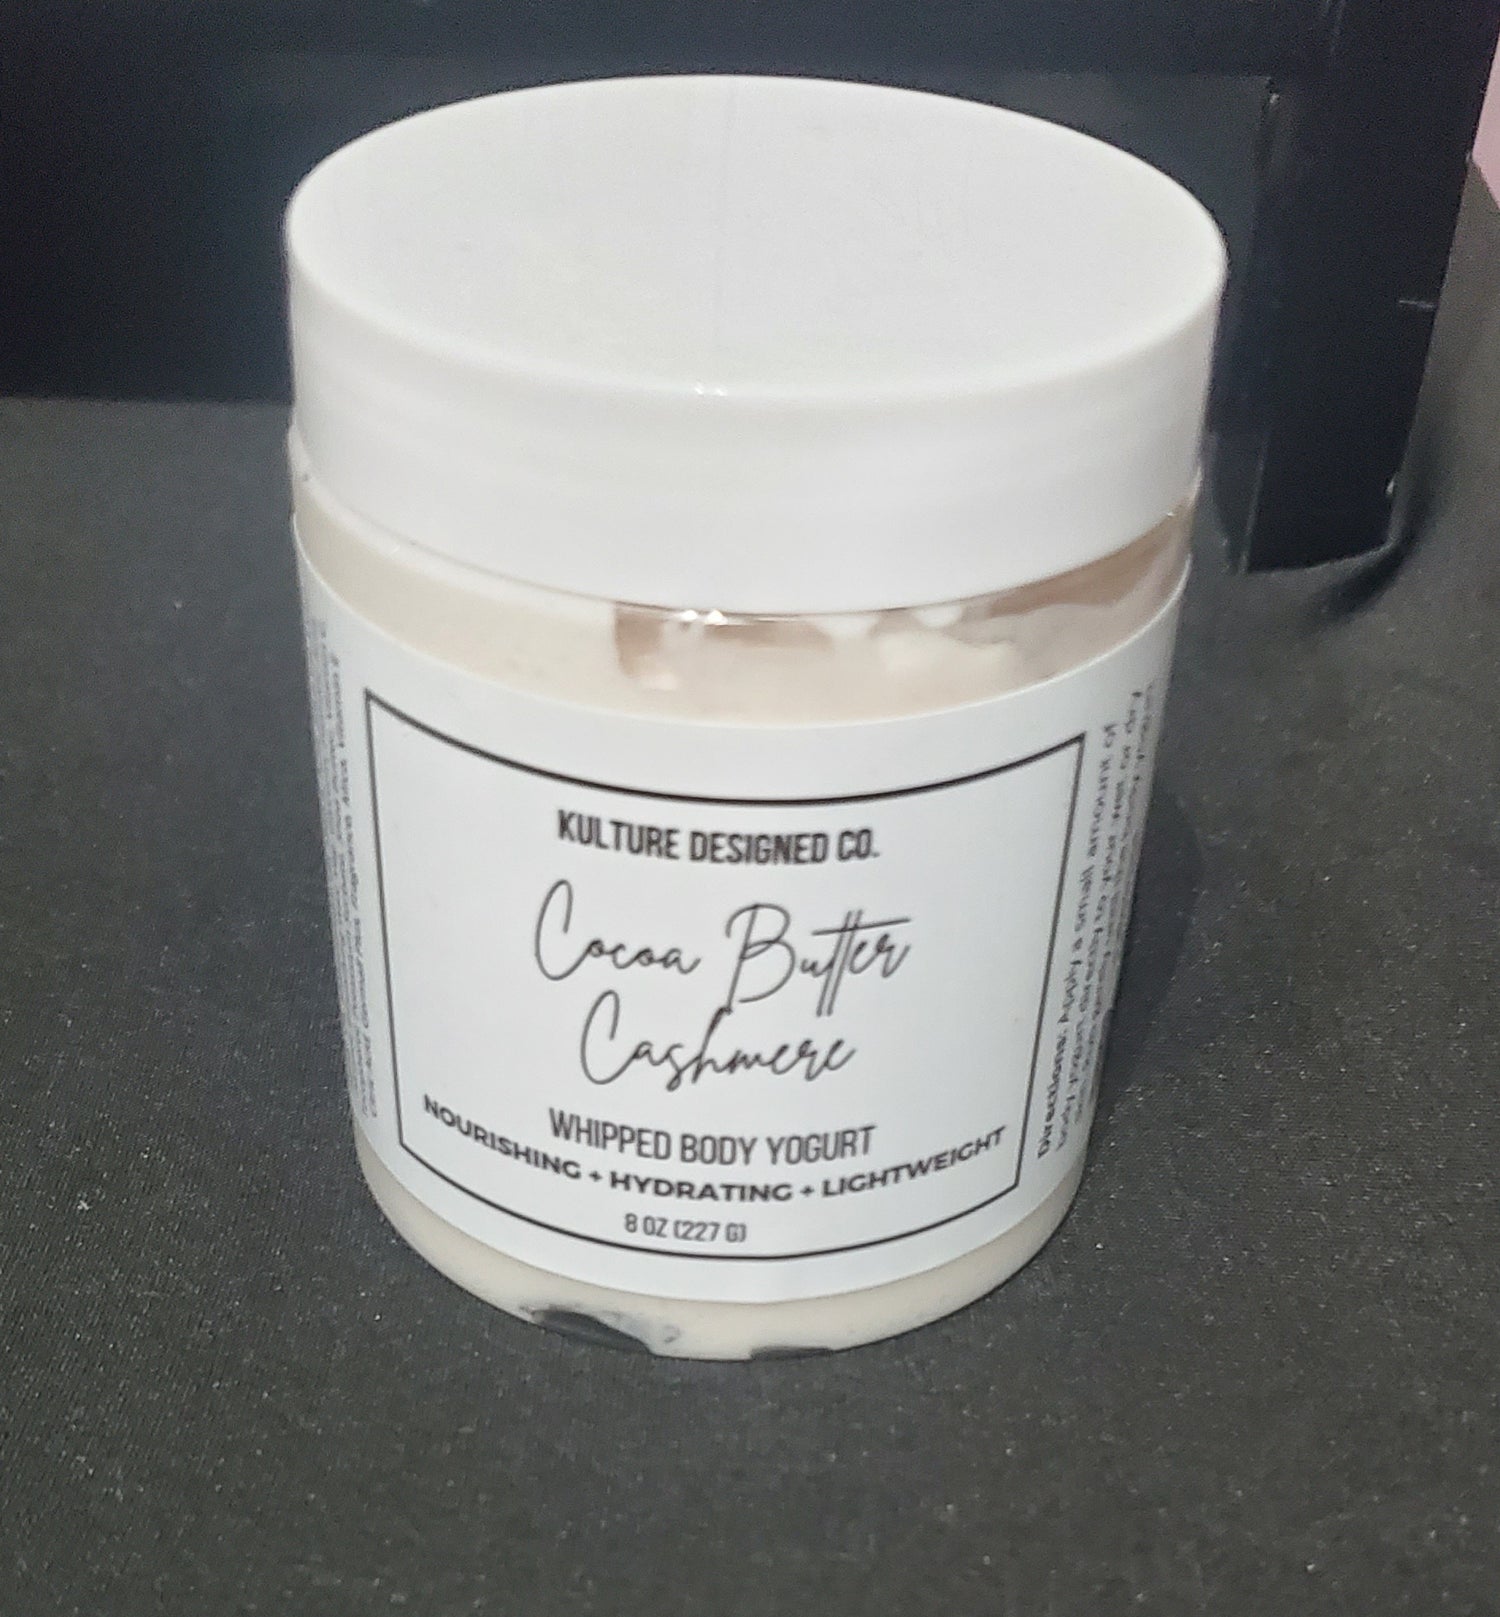 COCOA BUTTER CASHMERE WHIPPED BODY BUTTER - Kulture Designed Co.